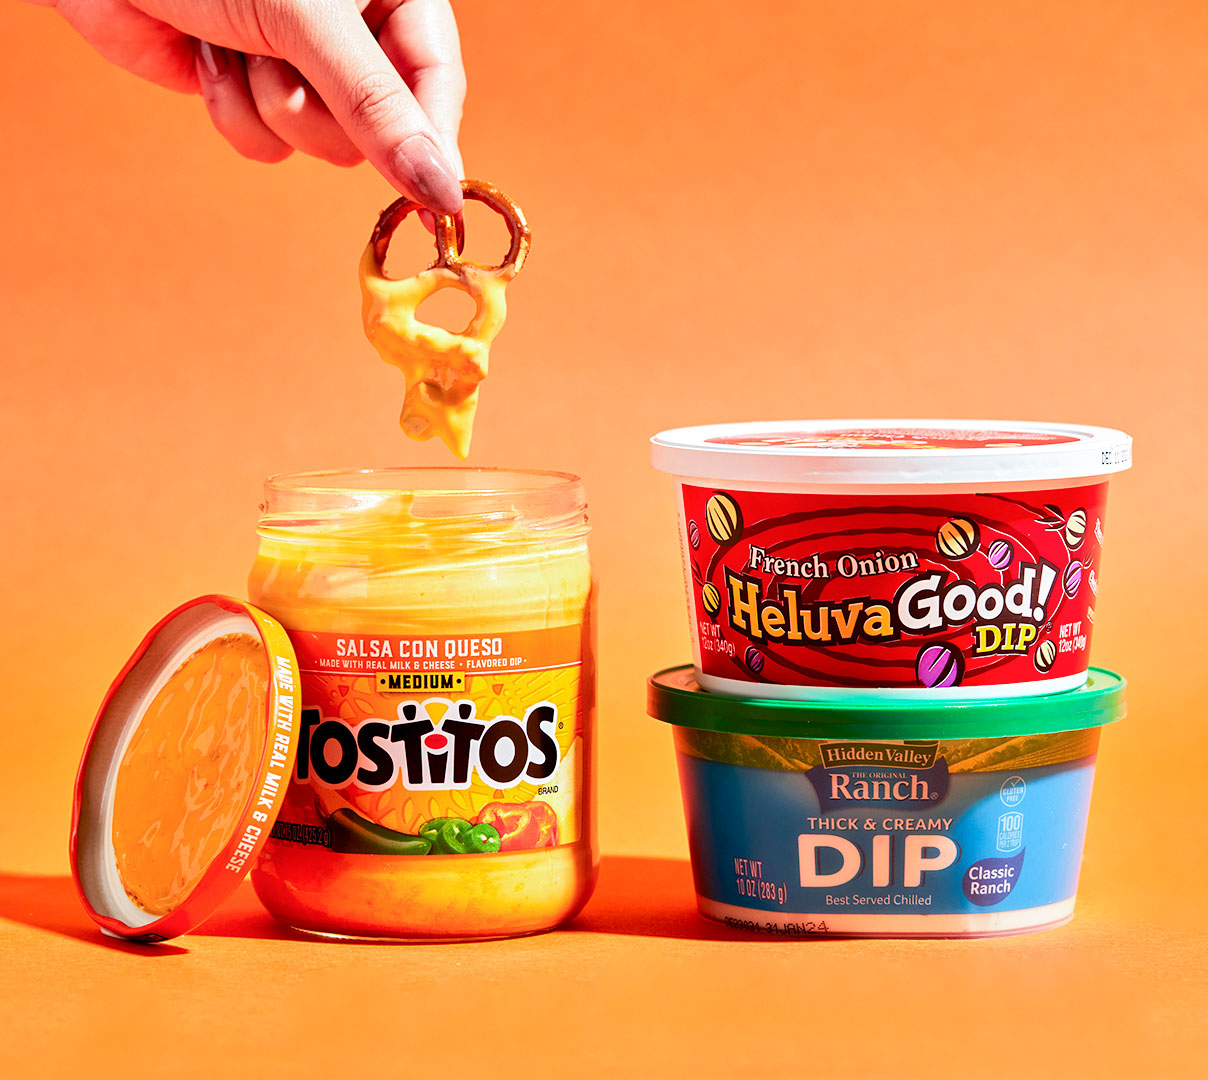 9 Store-Bought Vegan Dips You Need to Try